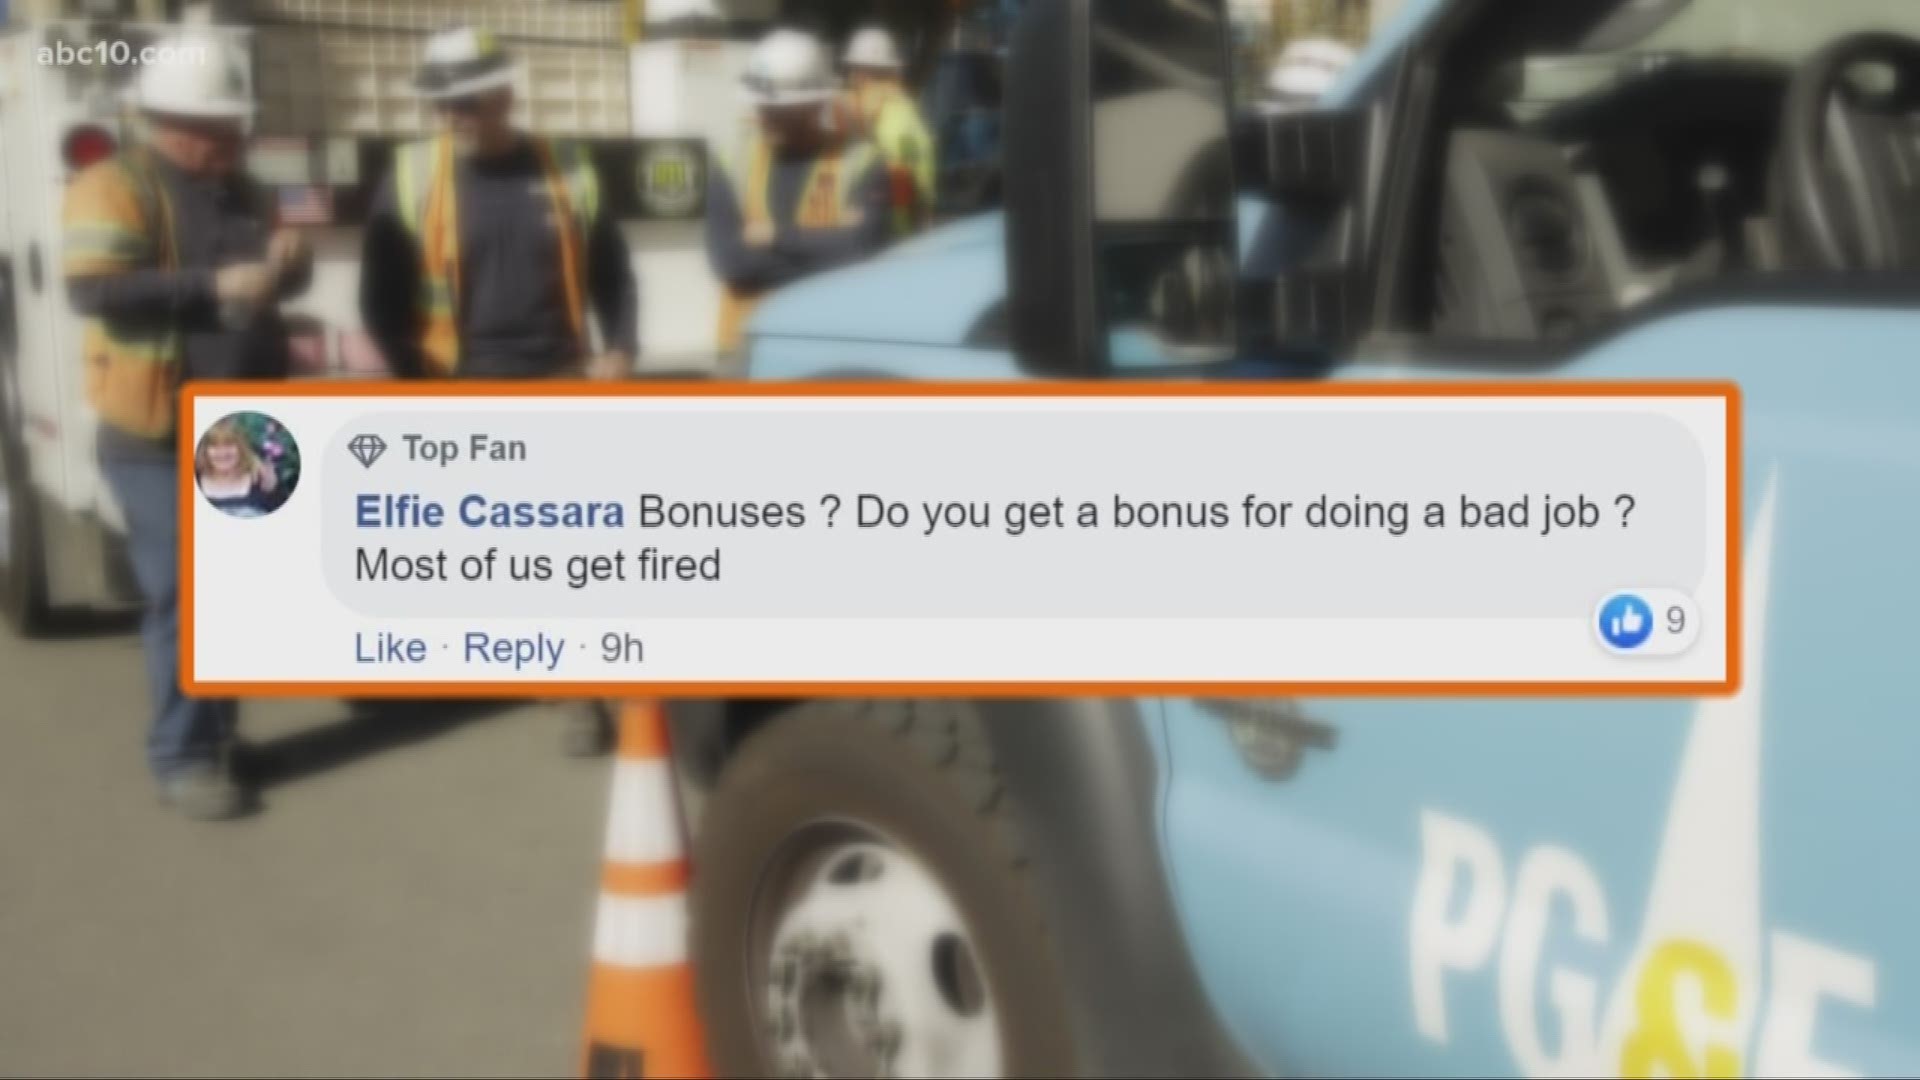 Big bonuses aren't illegal, it's just tone deaf. Walt takes a look at what PG&E is doing right and wrong.